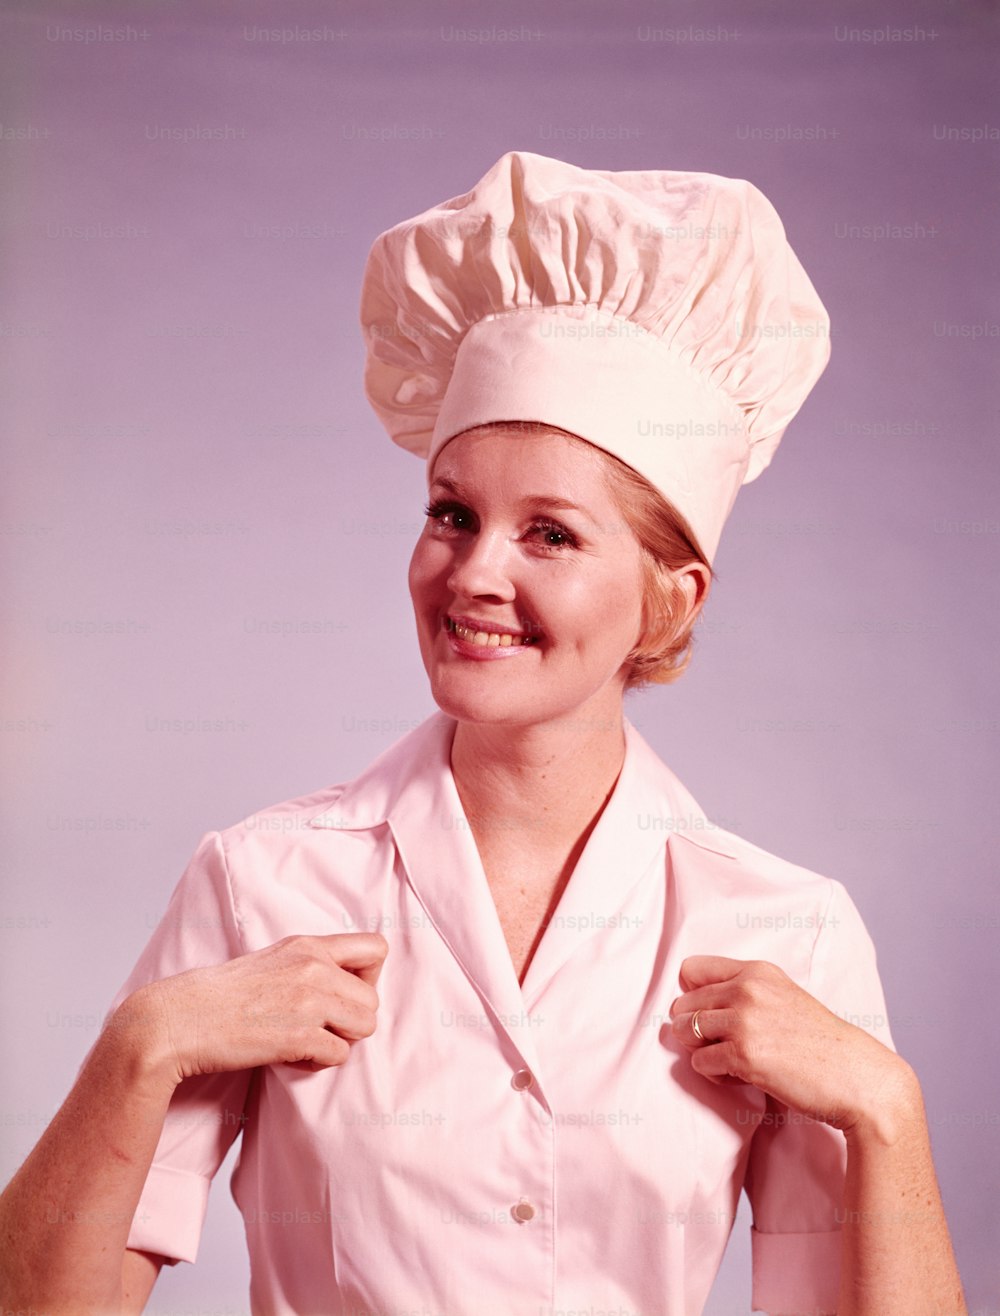 UNITED STATES - CIRCA 1960s:  Female chef smiling and gesturing thumbs up.